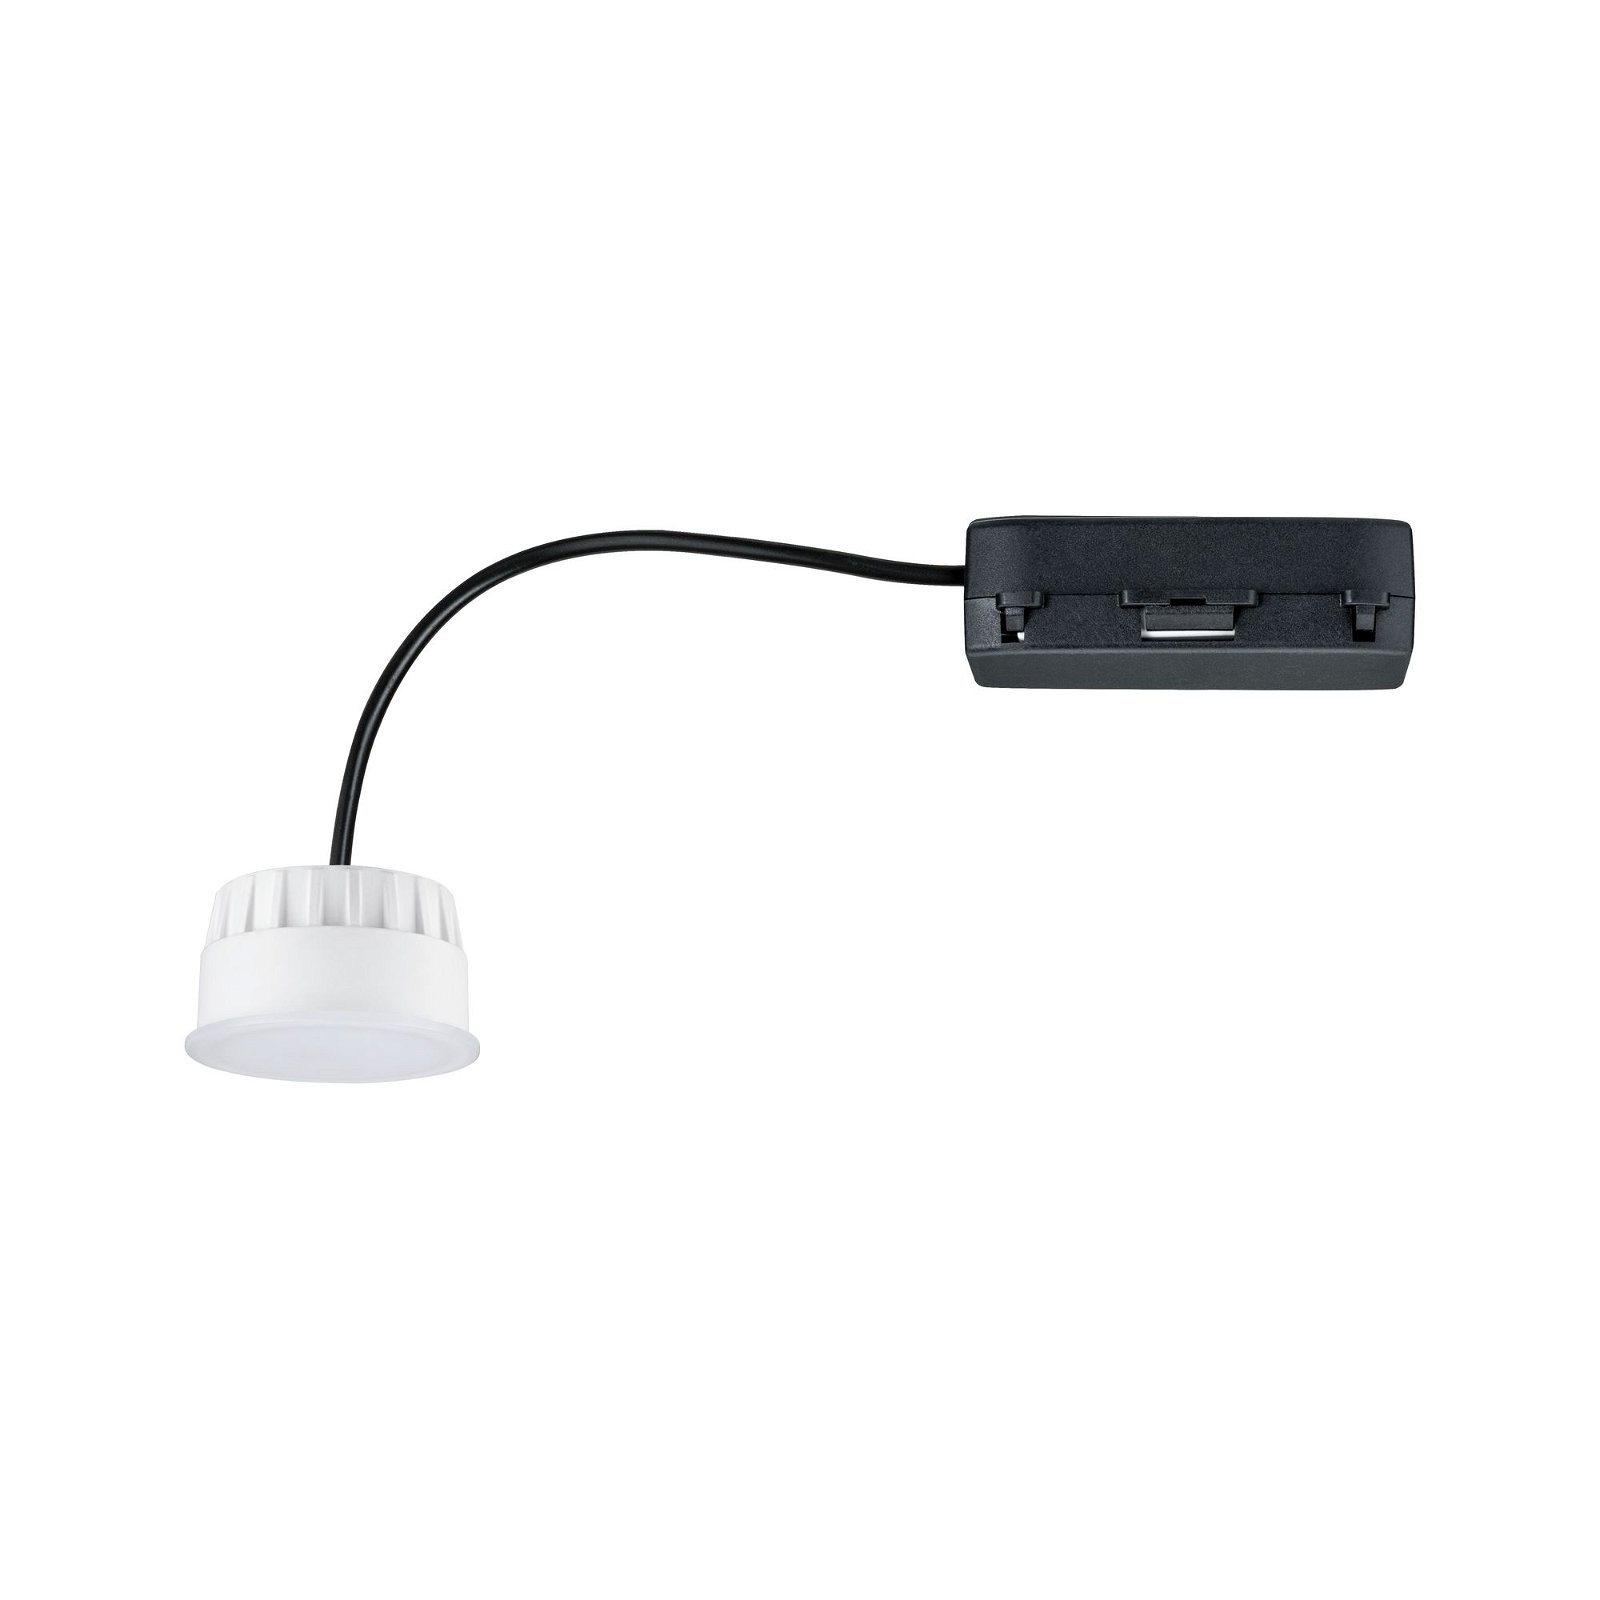 LED-module inbouwlamp Choose Coin Set van 3 White Switch rond 51mm Coin 3x6,5W 3x580lm 230V White Switch Satijn